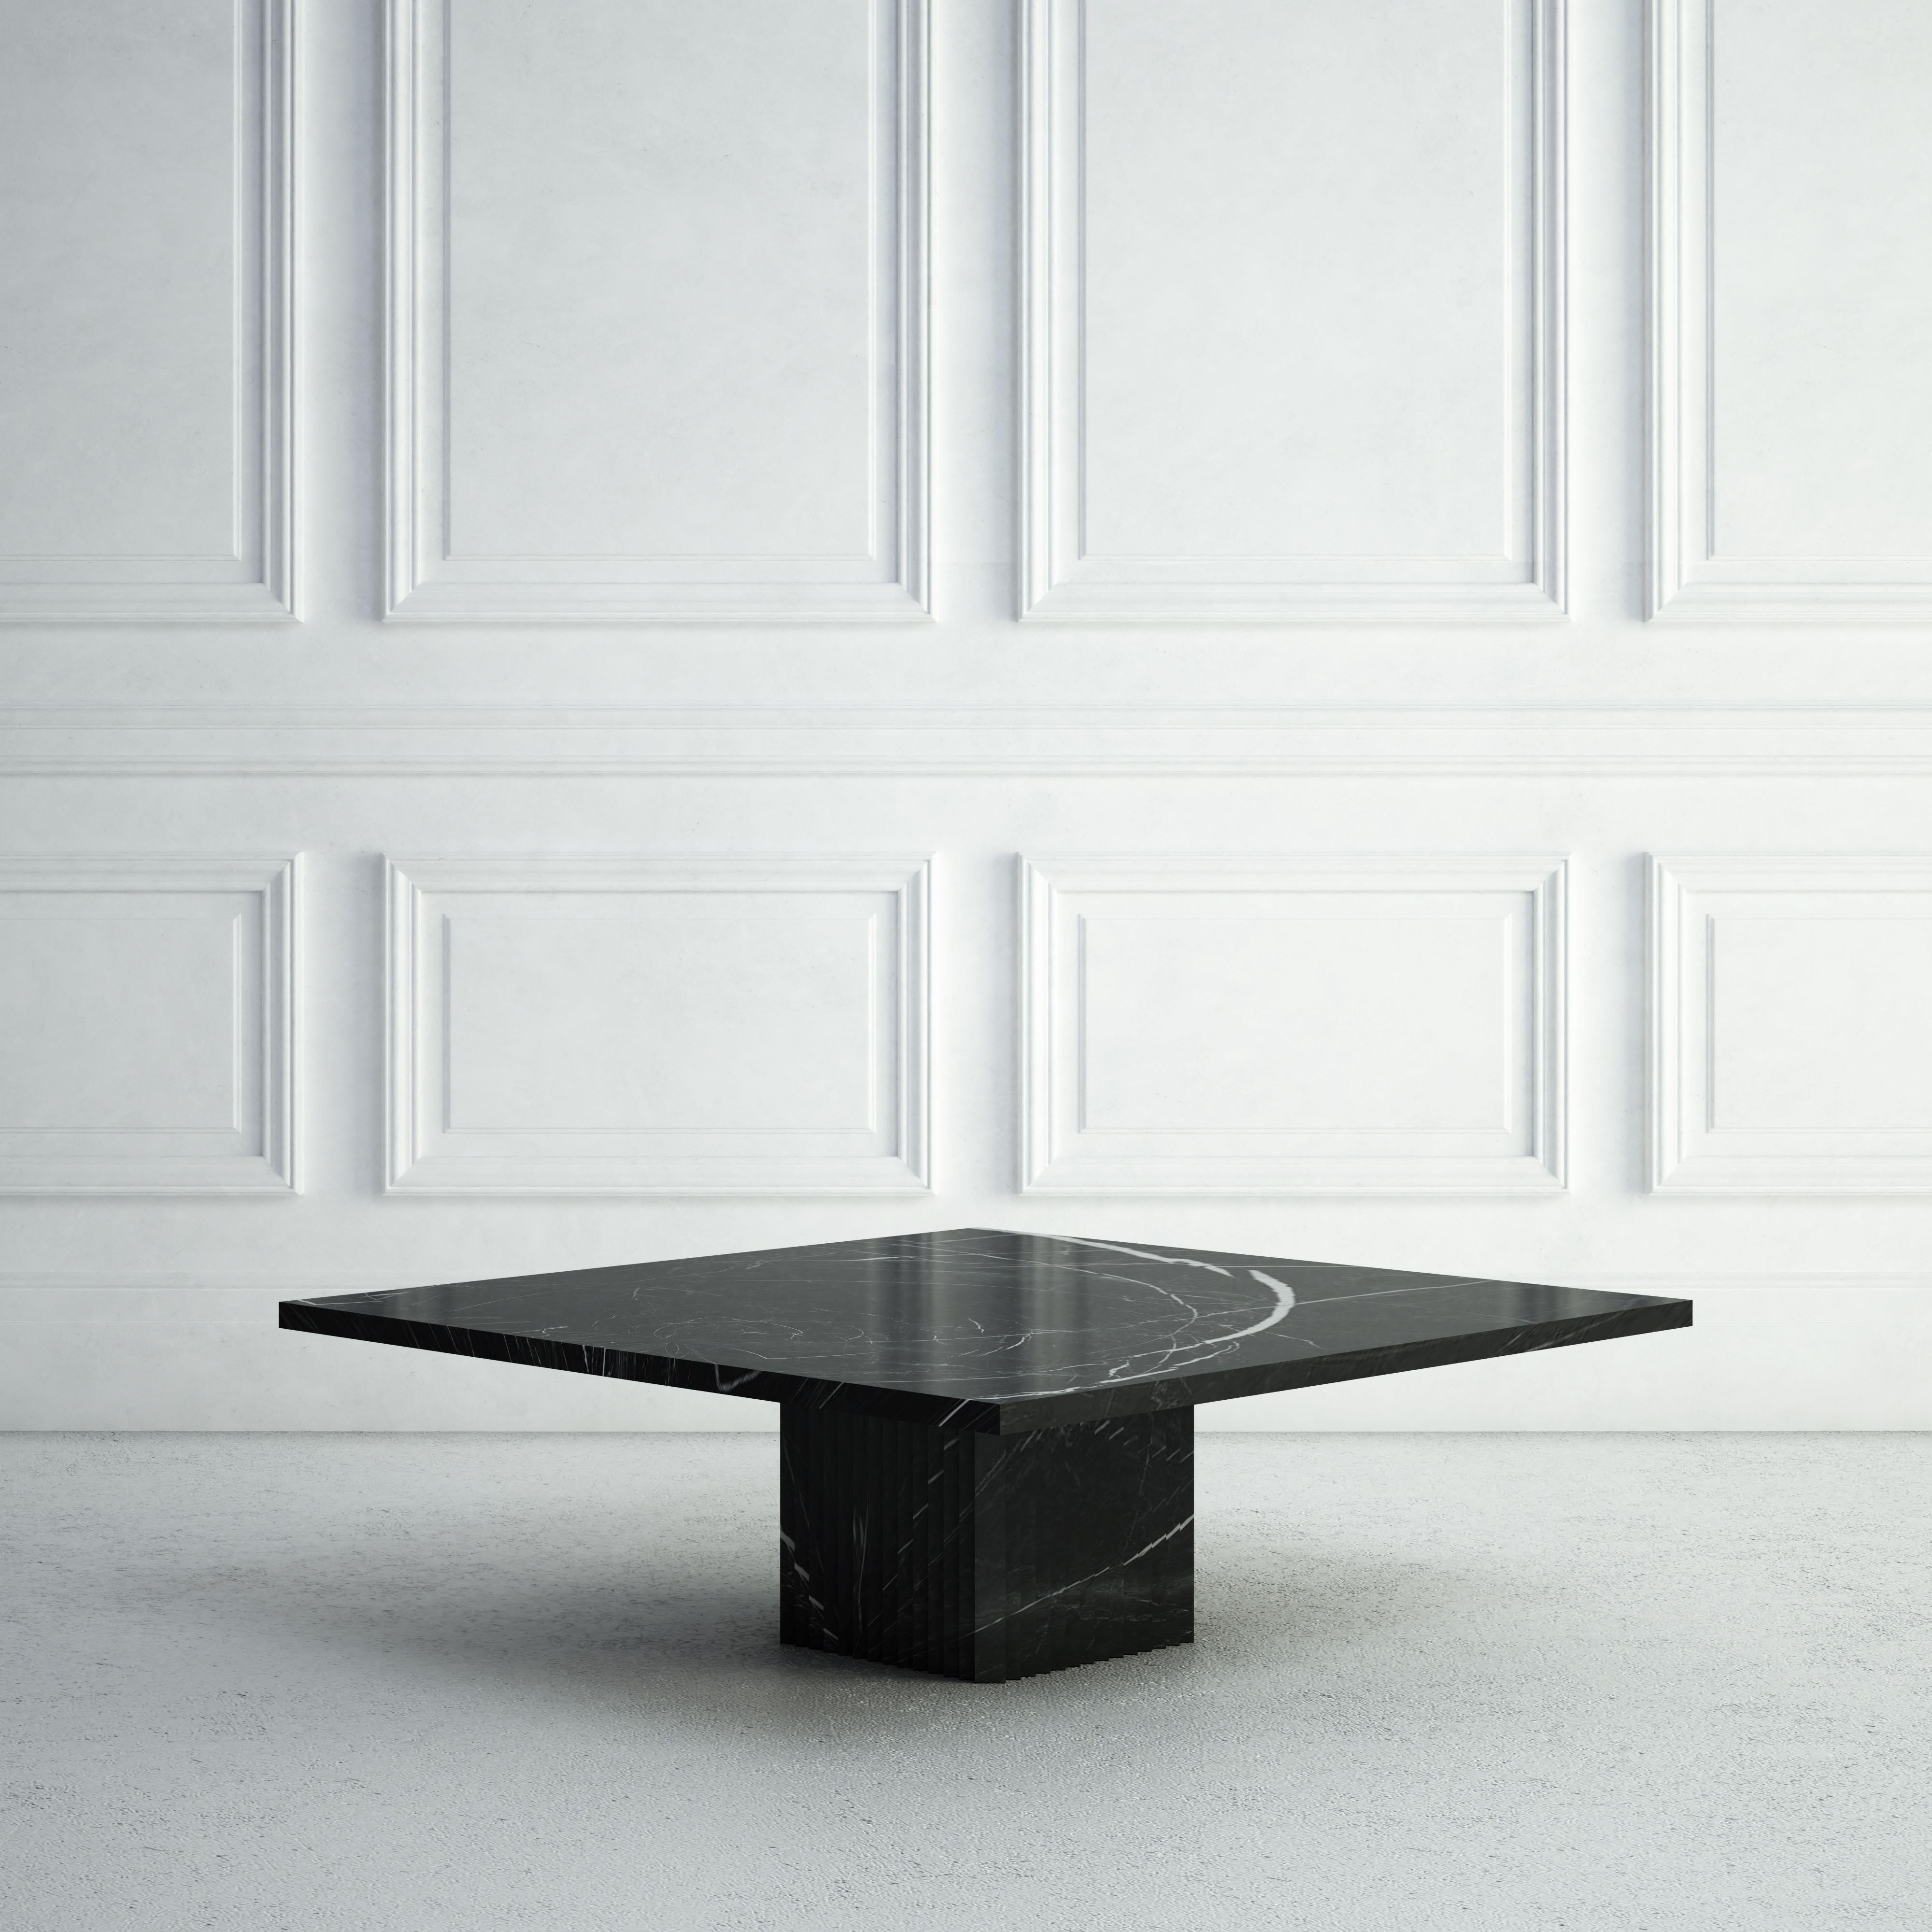 The Odette is a graceful modern coffee table.  The top is made from an elegant thin square stone slab, with the base, also square, showing vertical carved peaked ridges on each of its four sides.  The same stone is used throughout.  The table is